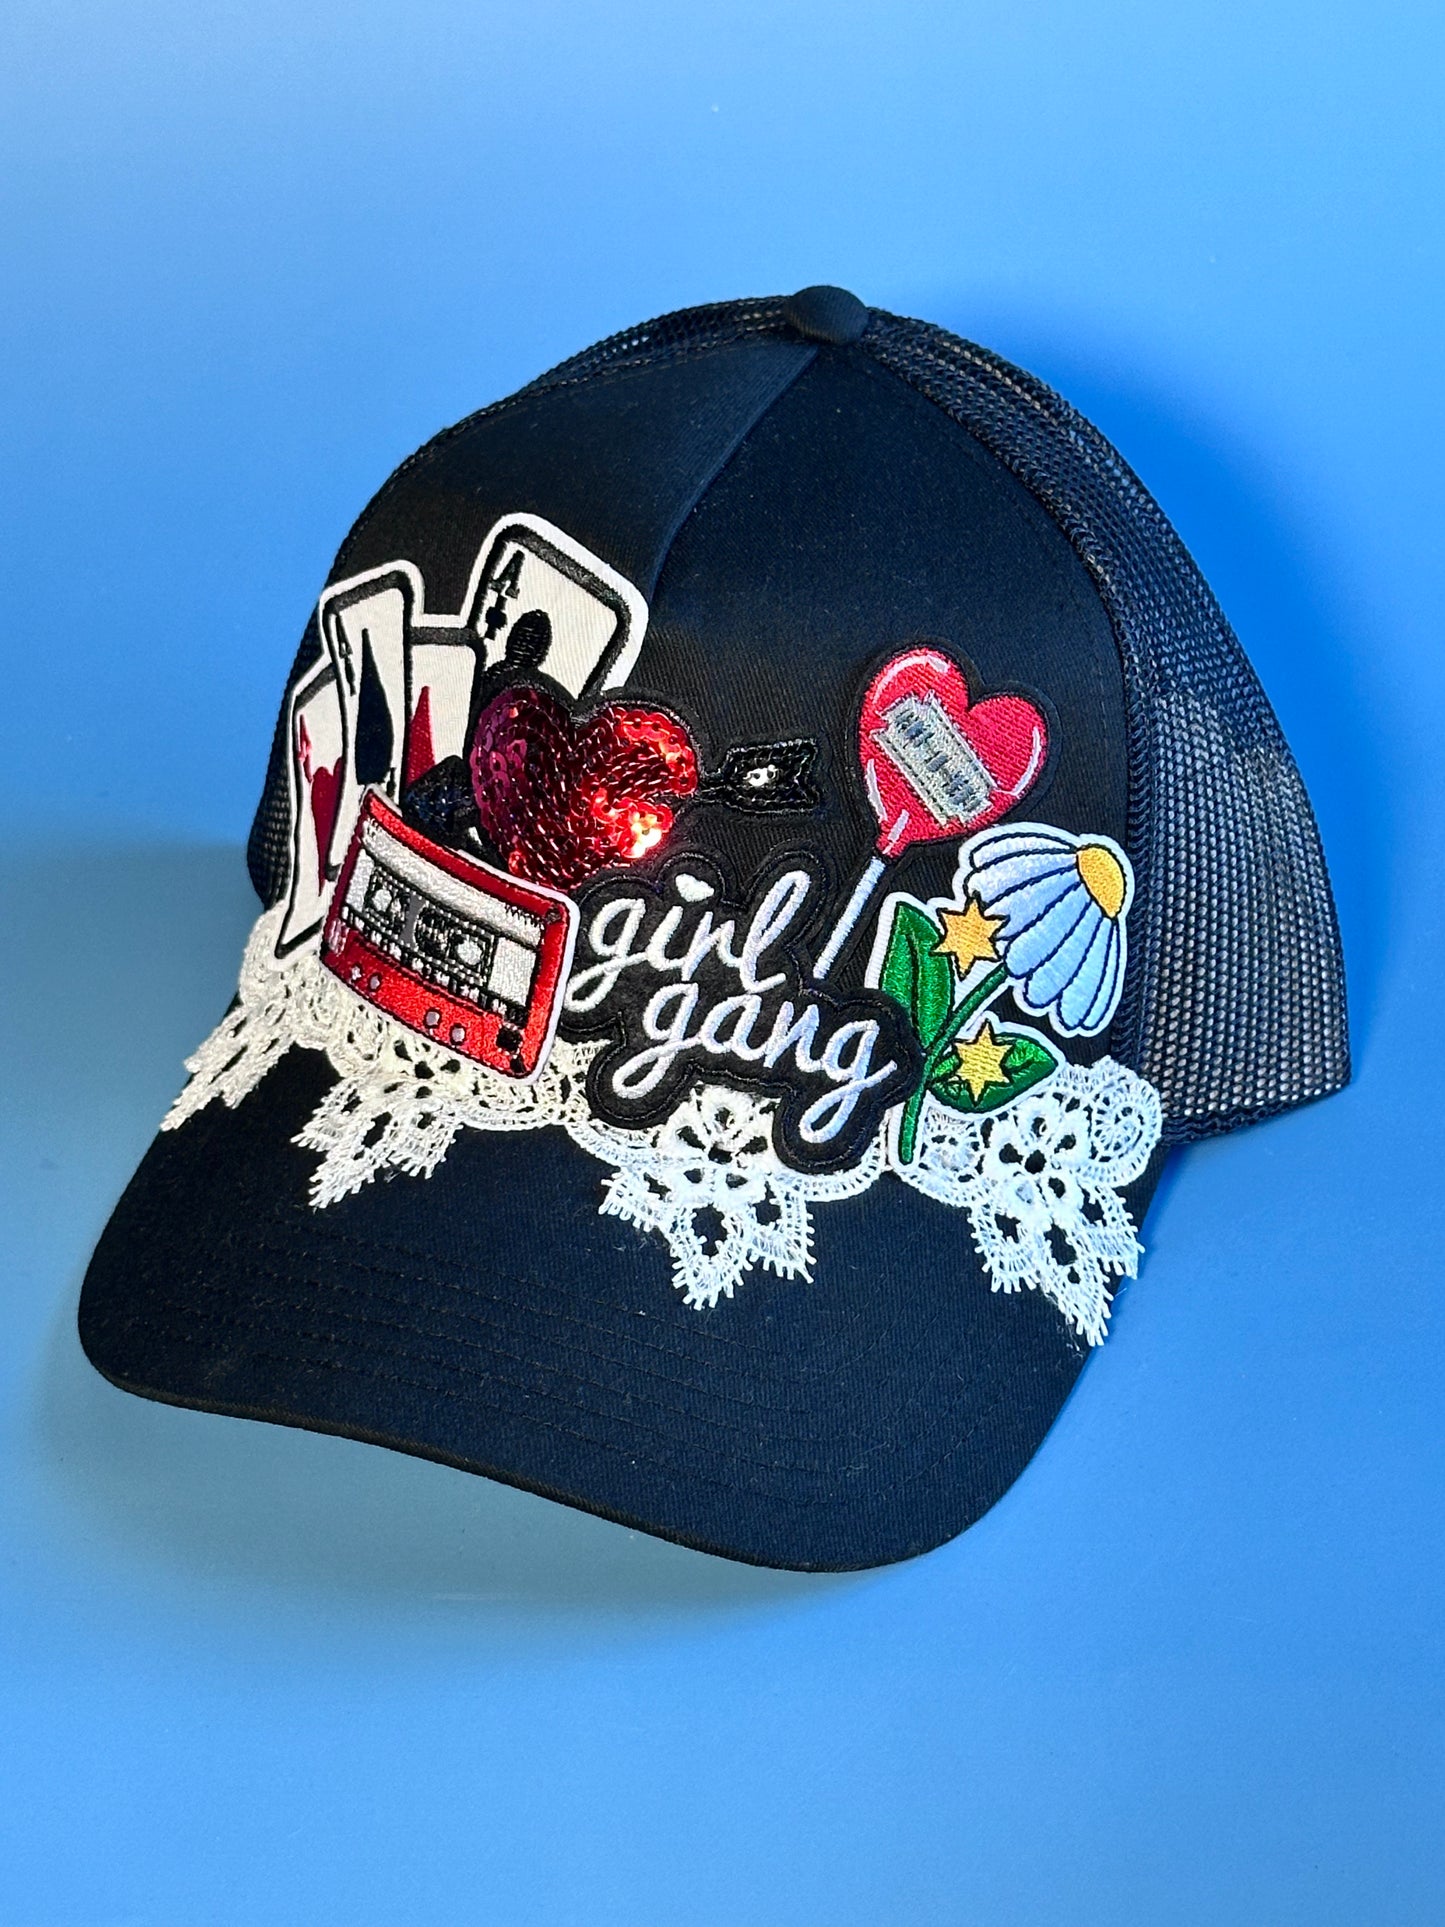 Fun-Loving Lacey Girl Gang with Our "Lacey Groove" Happy Soul Trucker Hat